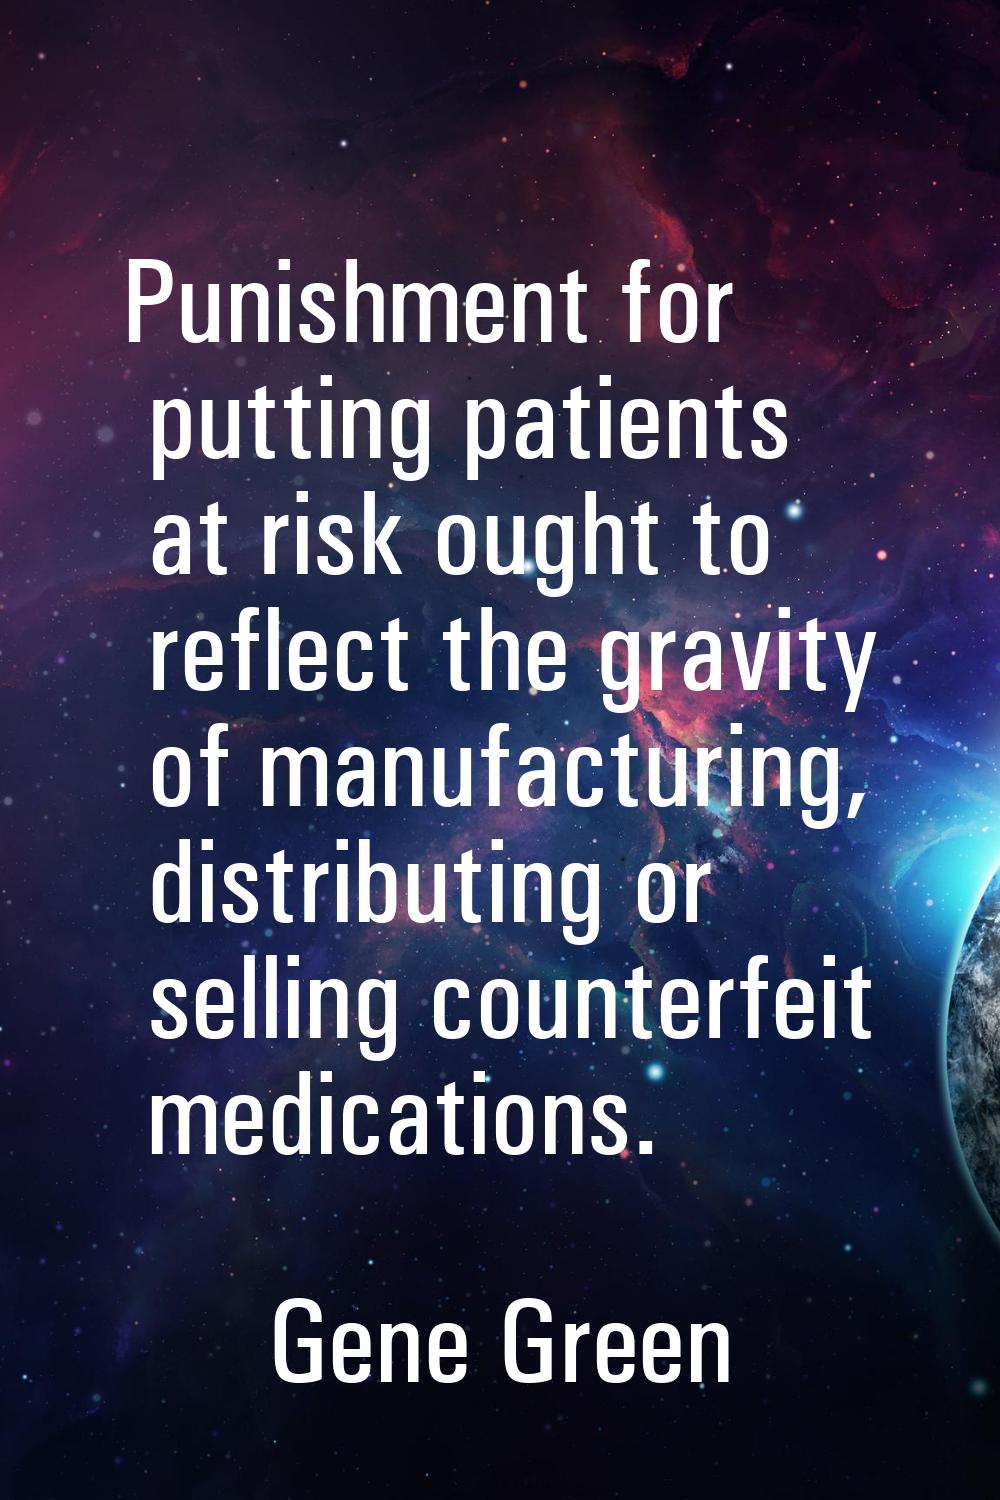 Punishment for putting patients at risk ought to reflect the gravity of manufacturing, distributing